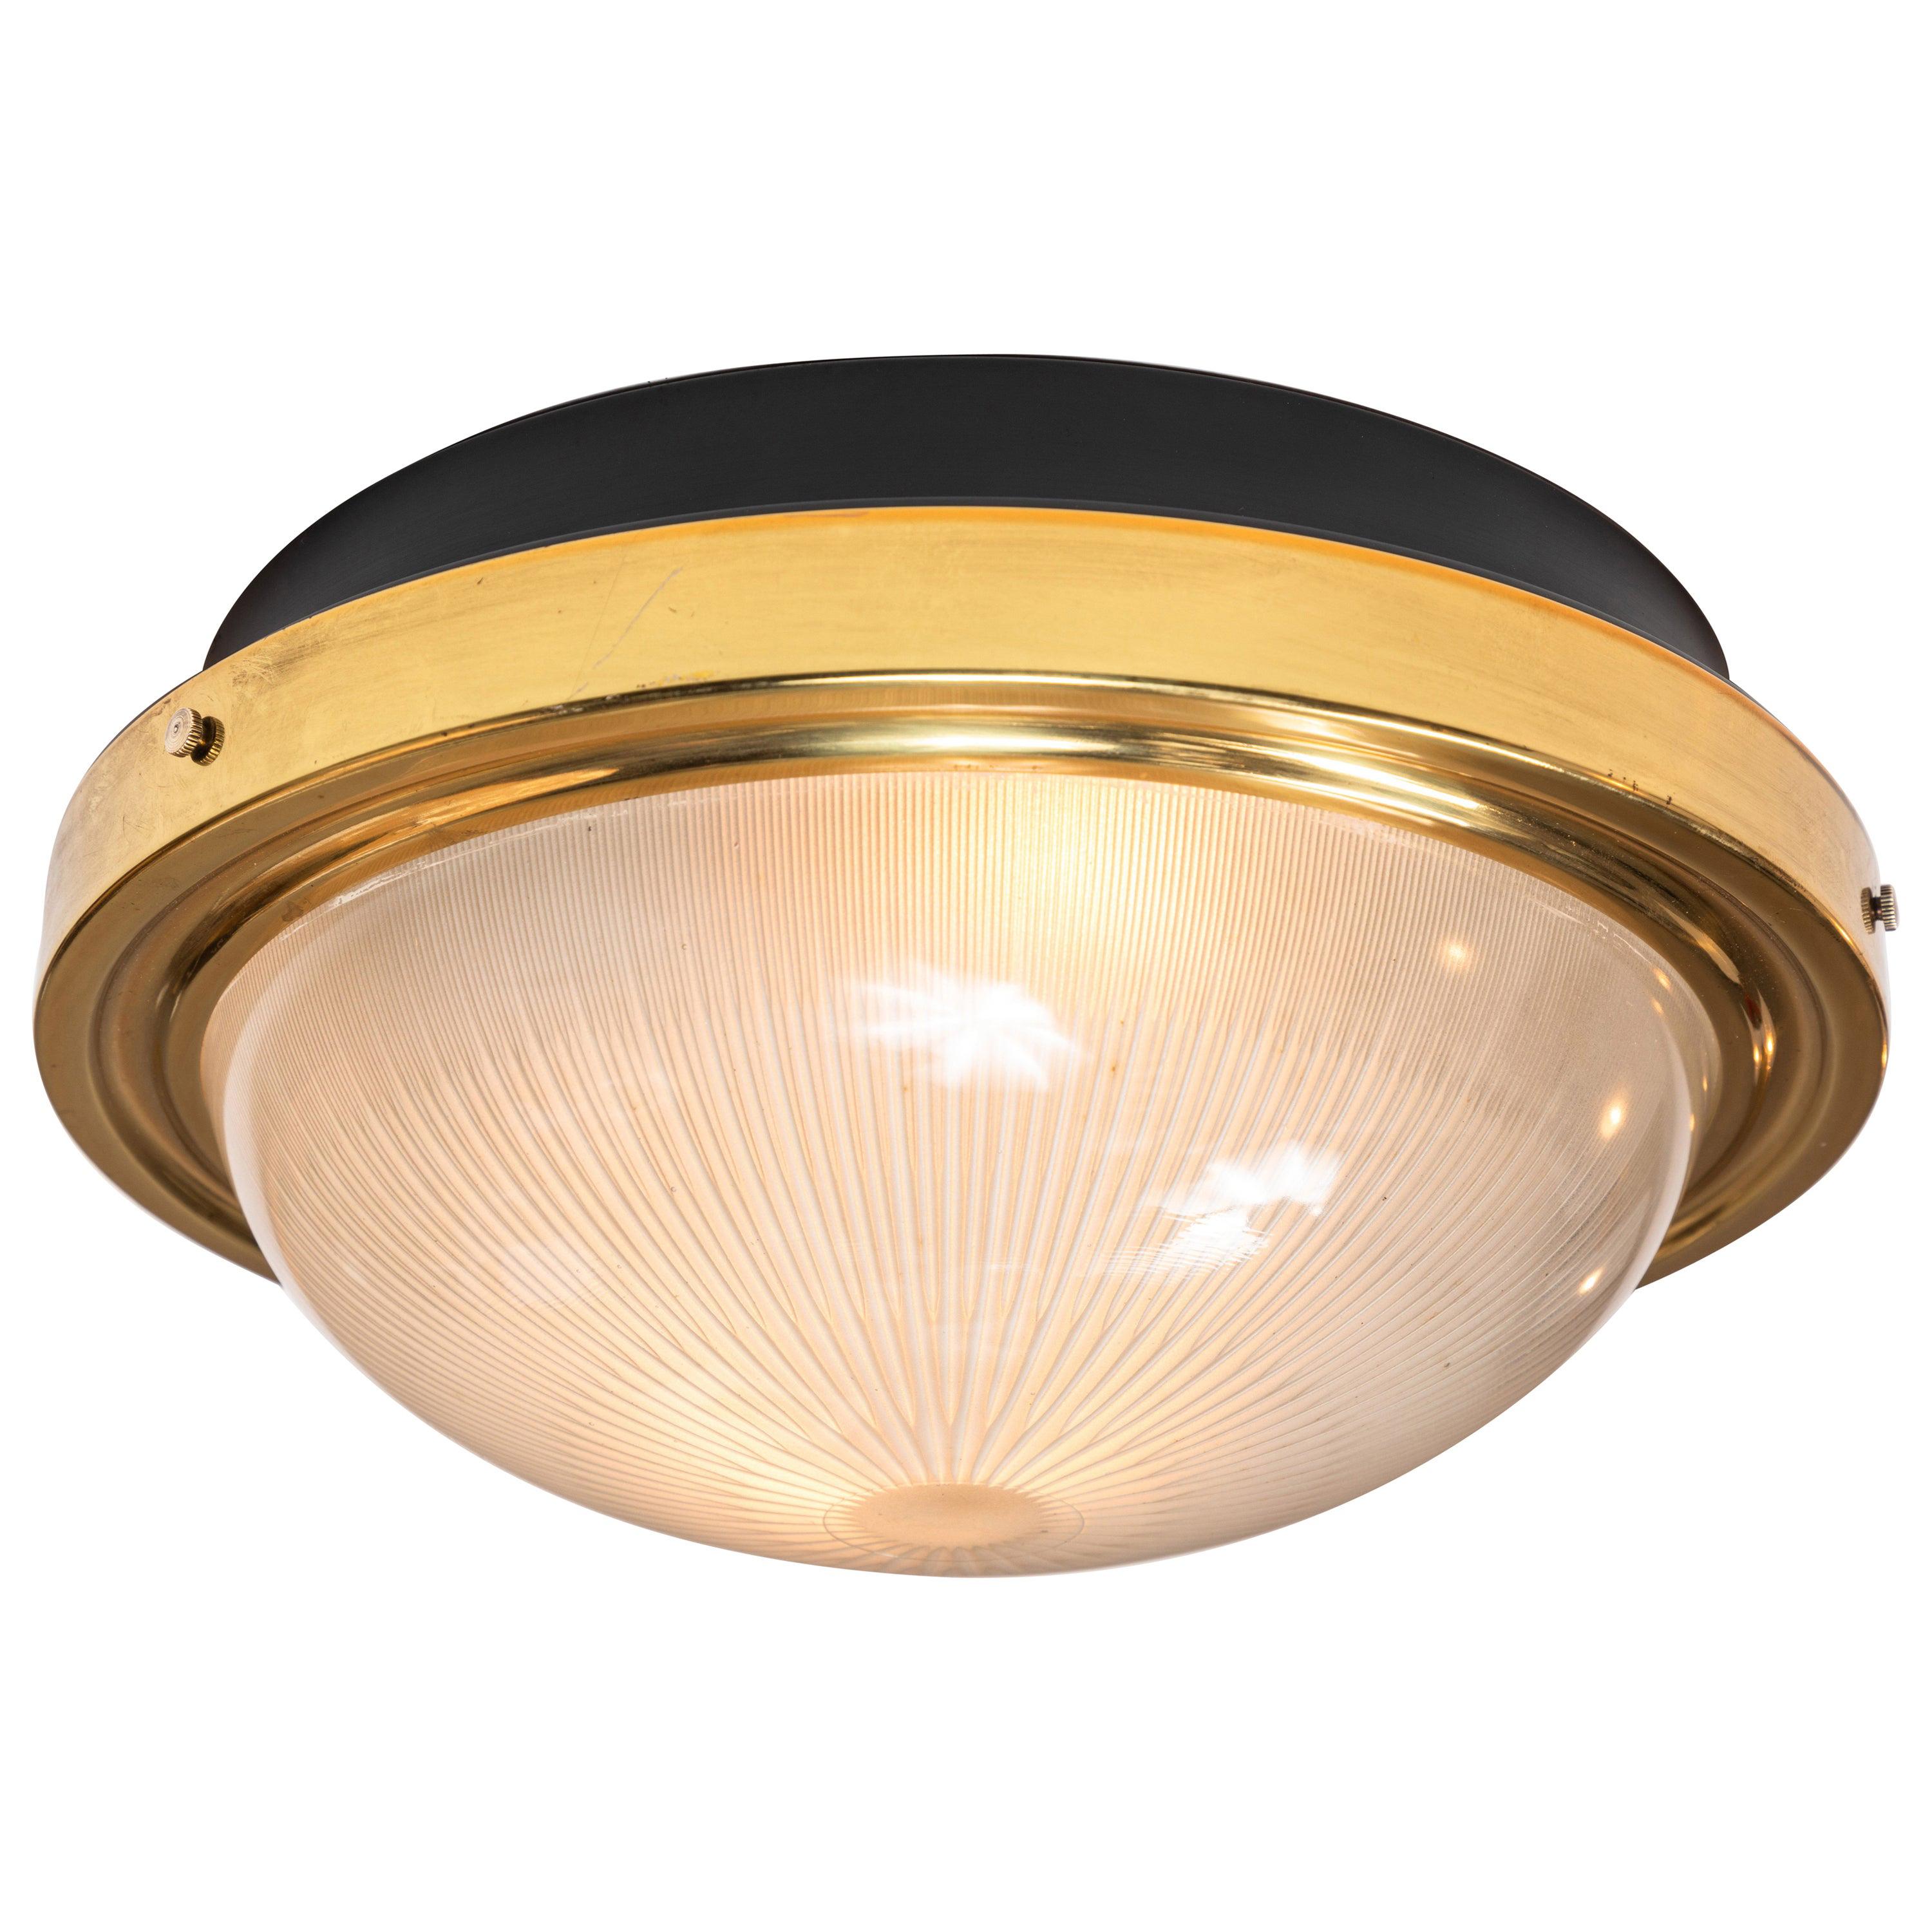 1960s Sergio Mazza Brass and Glass Wall or Ceiling Light for Artemide